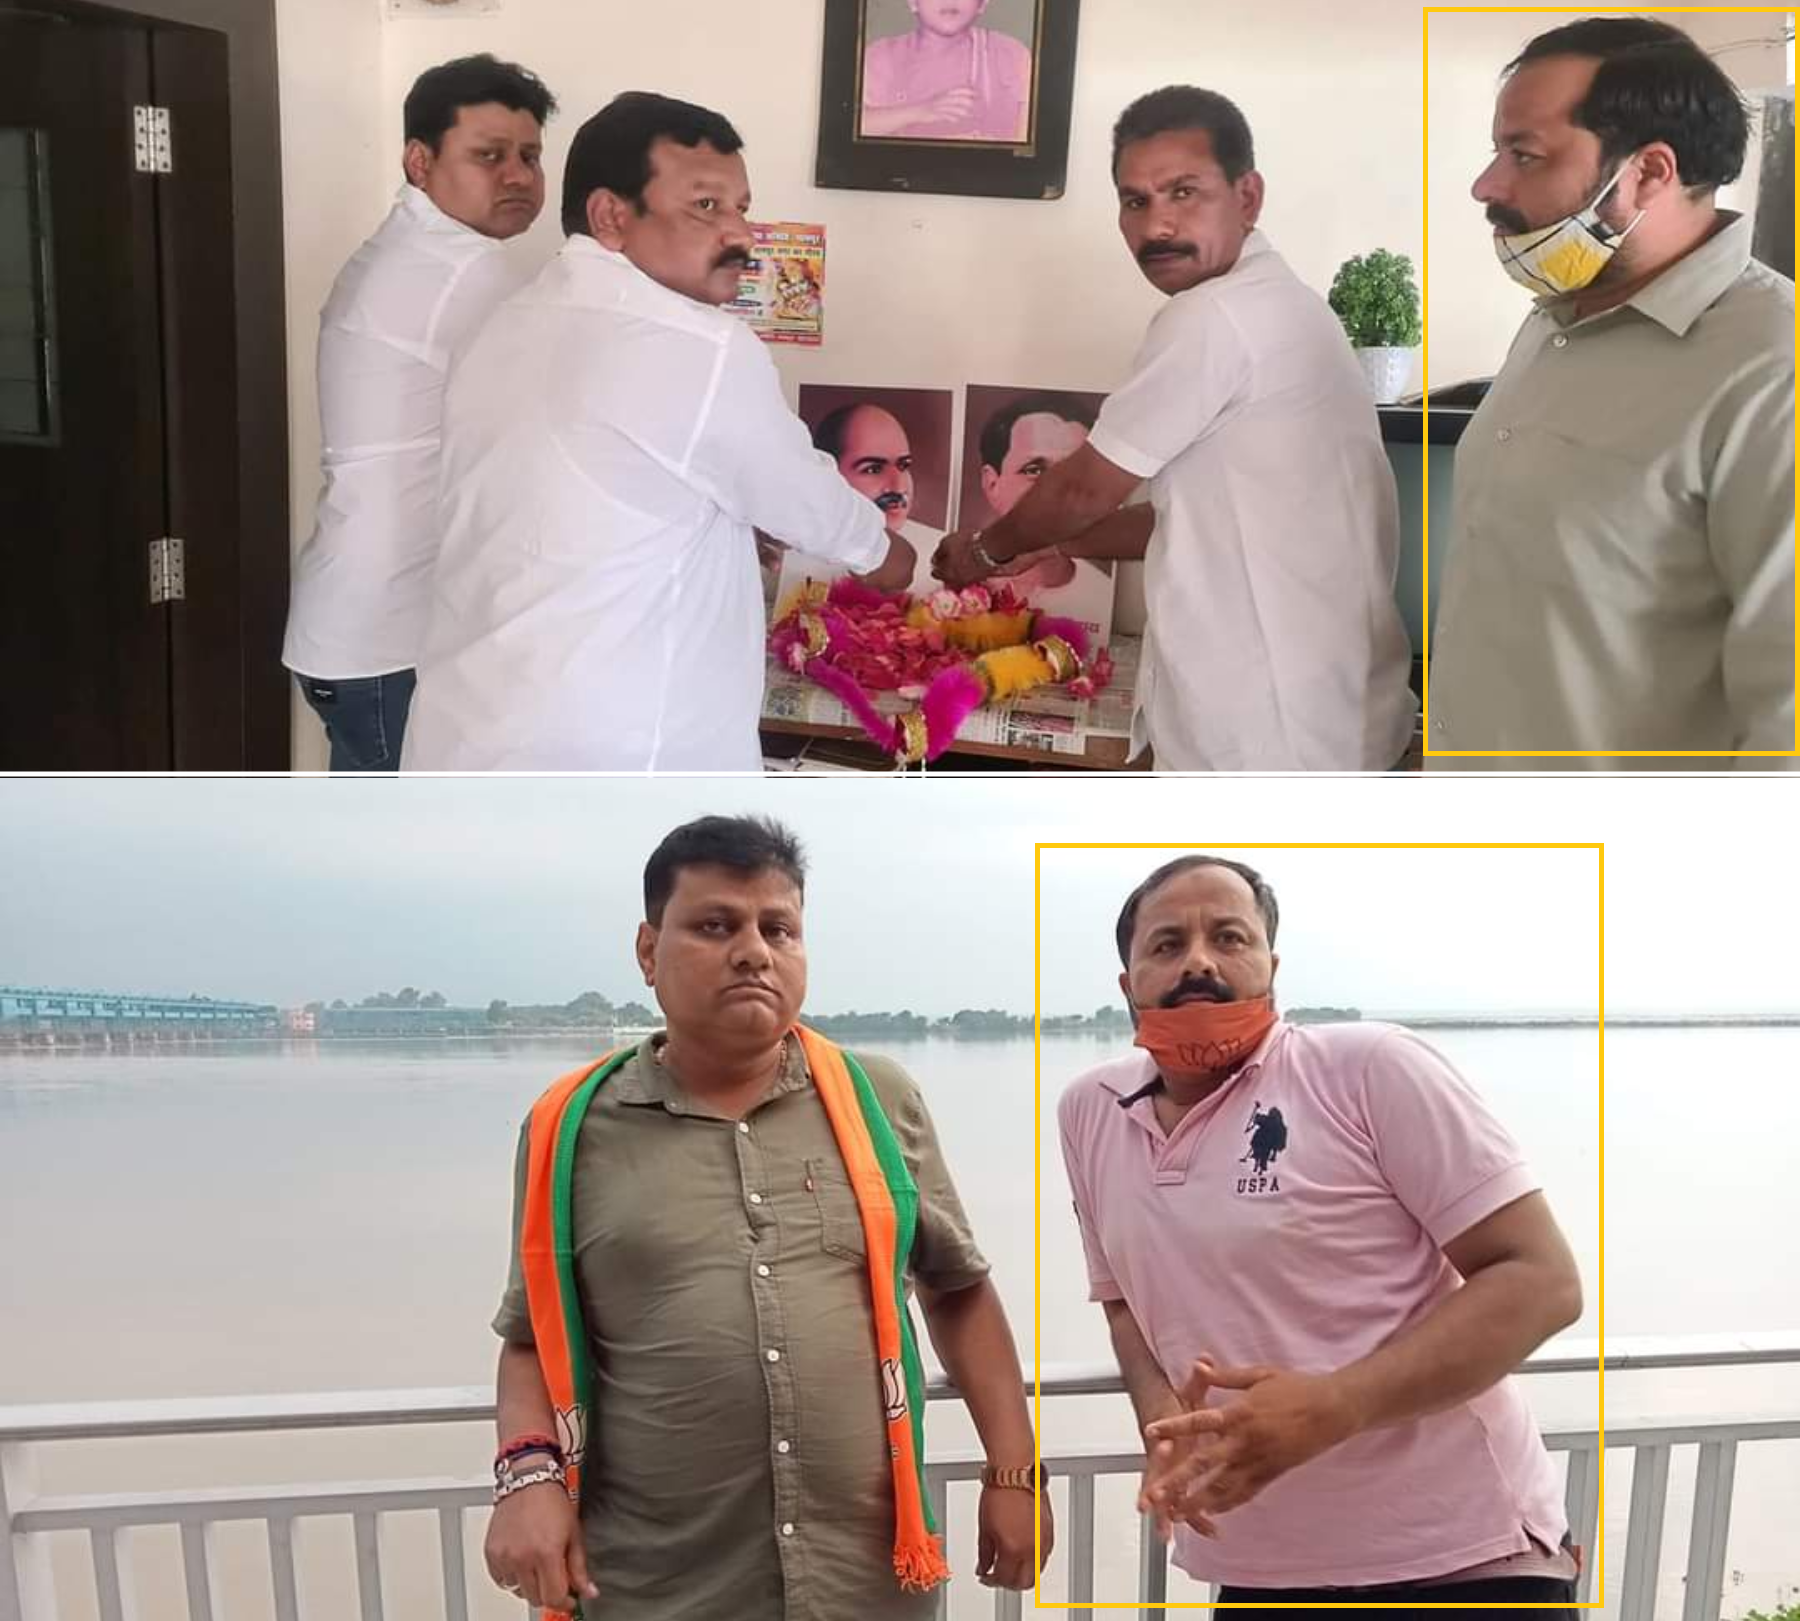 Daud Ali (Yellow Box) during an event in BJP Office and with Udit Narayan, Nephew of BJP MLA Ashok Rana